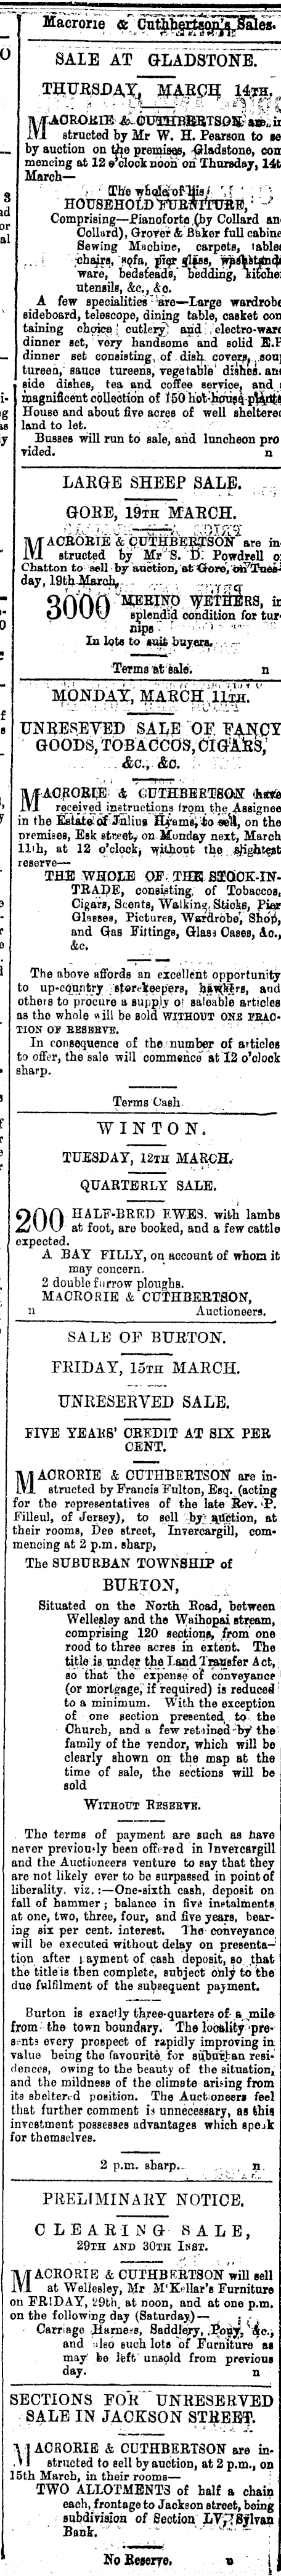 Papers Past Newspapers Southland Times 11 March 1878 Page 3 Advertisements Column 6